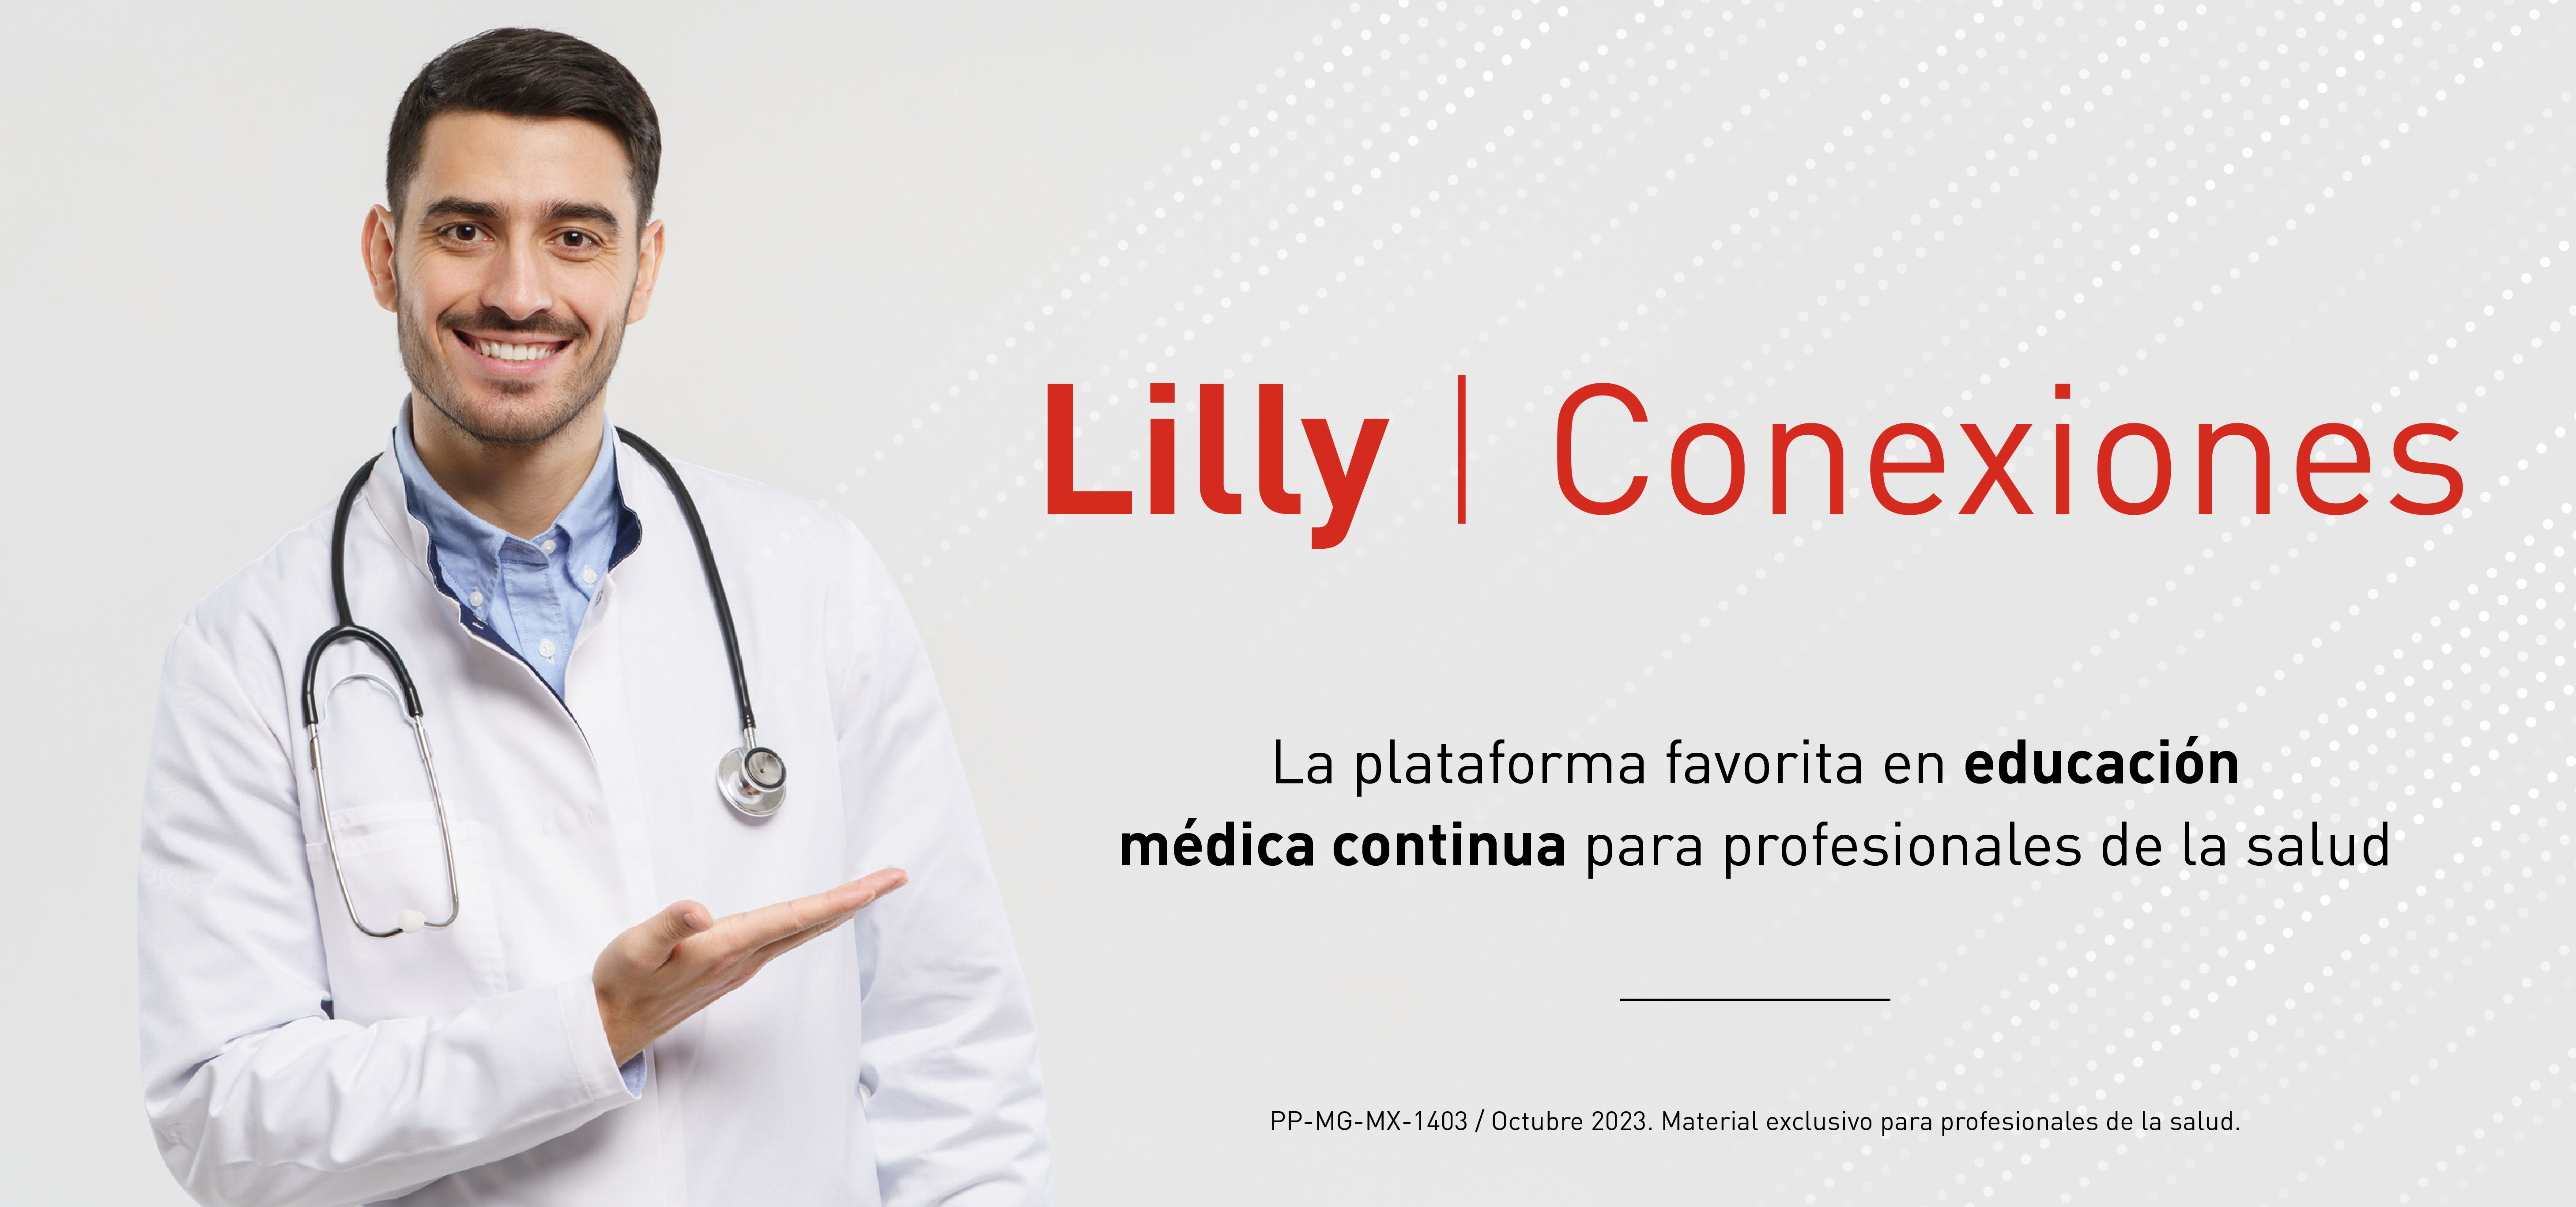 PP-MG-MX-1403_Lilly Conexiones_Banner 1400x656px_251023(1) (1).jpg